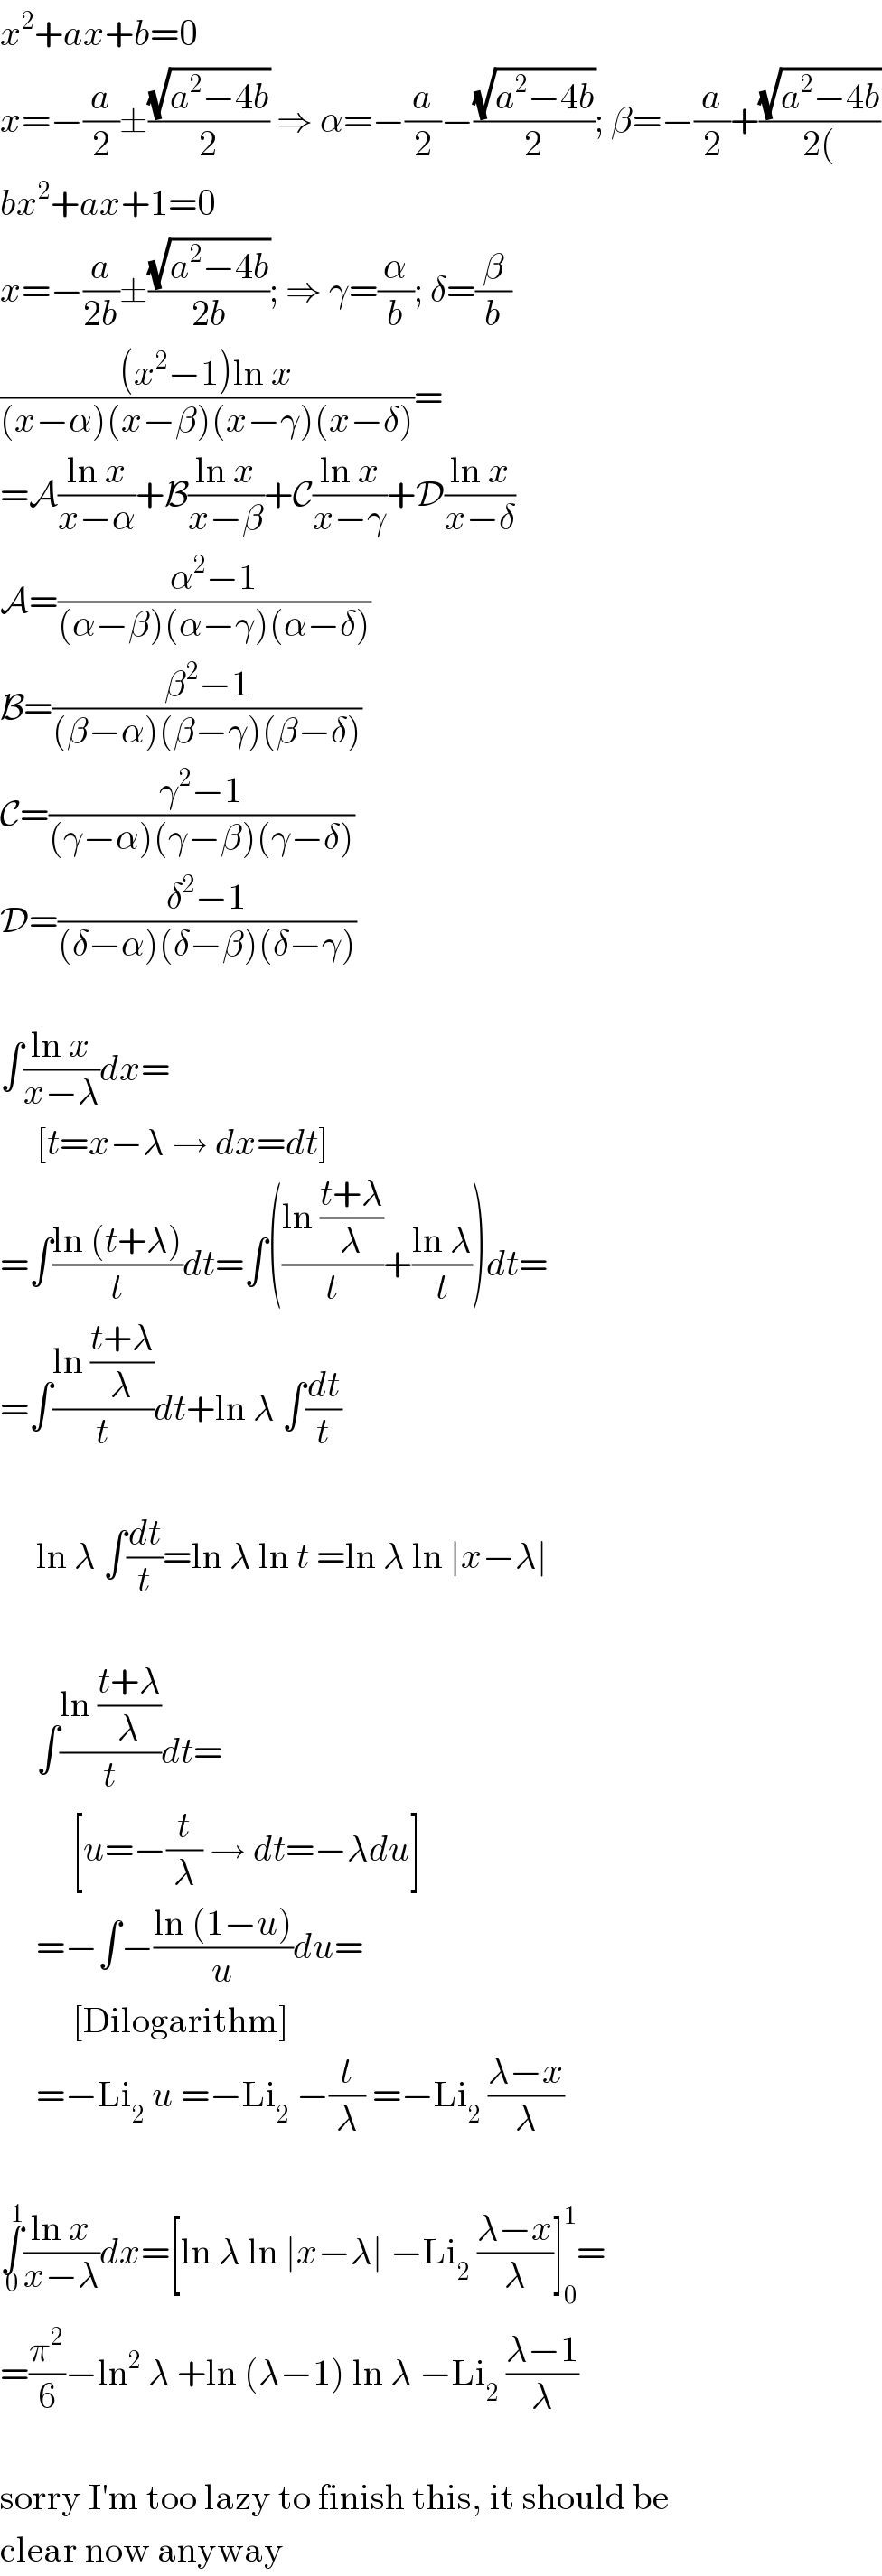 x^2 +ax+b=0  x=−(a/2)±((√(a^2 −4b))/2) ⇒ α=−(a/2)−((√(a^2 −4b))/2); β=−(a/2)+((√(a^2 −4b))/(2())  bx^2 +ax+1=0  x=−(a/(2b))±((√(a^2 −4b))/(2b)); ⇒ γ=(α/b); δ=(β/b)  (((x^2 −1)ln x)/((x−α)(x−β)(x−γ)(x−δ)))=  =A((ln x)/(x−α))+B((ln x)/(x−β))+C((ln x)/(x−γ))+D((ln x)/(x−δ))  A=((α^2 −1)/((α−β)(α−γ)(α−δ)))  B=((β^2 −1)/((β−α)(β−γ)(β−δ)))  C=((γ^2 −1)/((γ−α)(γ−β)(γ−δ)))  D=((δ^2 −1)/((δ−α)(δ−β)(δ−γ)))    ∫((ln x)/(x−λ))dx=       [t=x−λ → dx=dt]  =∫((ln (t+λ))/t)dt=∫(((ln ((t+λ)/λ))/t)+((ln λ)/t))dt=  =∫((ln ((t+λ)/λ))/t)dt+ln λ ∫(dt/t)         ln λ ∫(dt/t)=ln λ ln t =ln λ ln ∣x−λ∣         ∫((ln ((t+λ)/λ))/t)dt=            [u=−(t/λ) → dt=−λdu]       =−∫−((ln (1−u))/u)du=            [Dilogarithm]       =−Li_2  u =−Li_2  −(t/λ) =−Li_2  ((λ−x)/λ)    ∫_0 ^1 ((ln x)/(x−λ))dx=[ln λ ln ∣x−λ∣ −Li_2  ((λ−x)/λ)]_0 ^1 =  =(π^2 /6)−ln^2  λ +ln (λ−1) ln λ −Li_2  ((λ−1)/λ)    sorry I′m too lazy to finish this, it should be  clear now anyway  